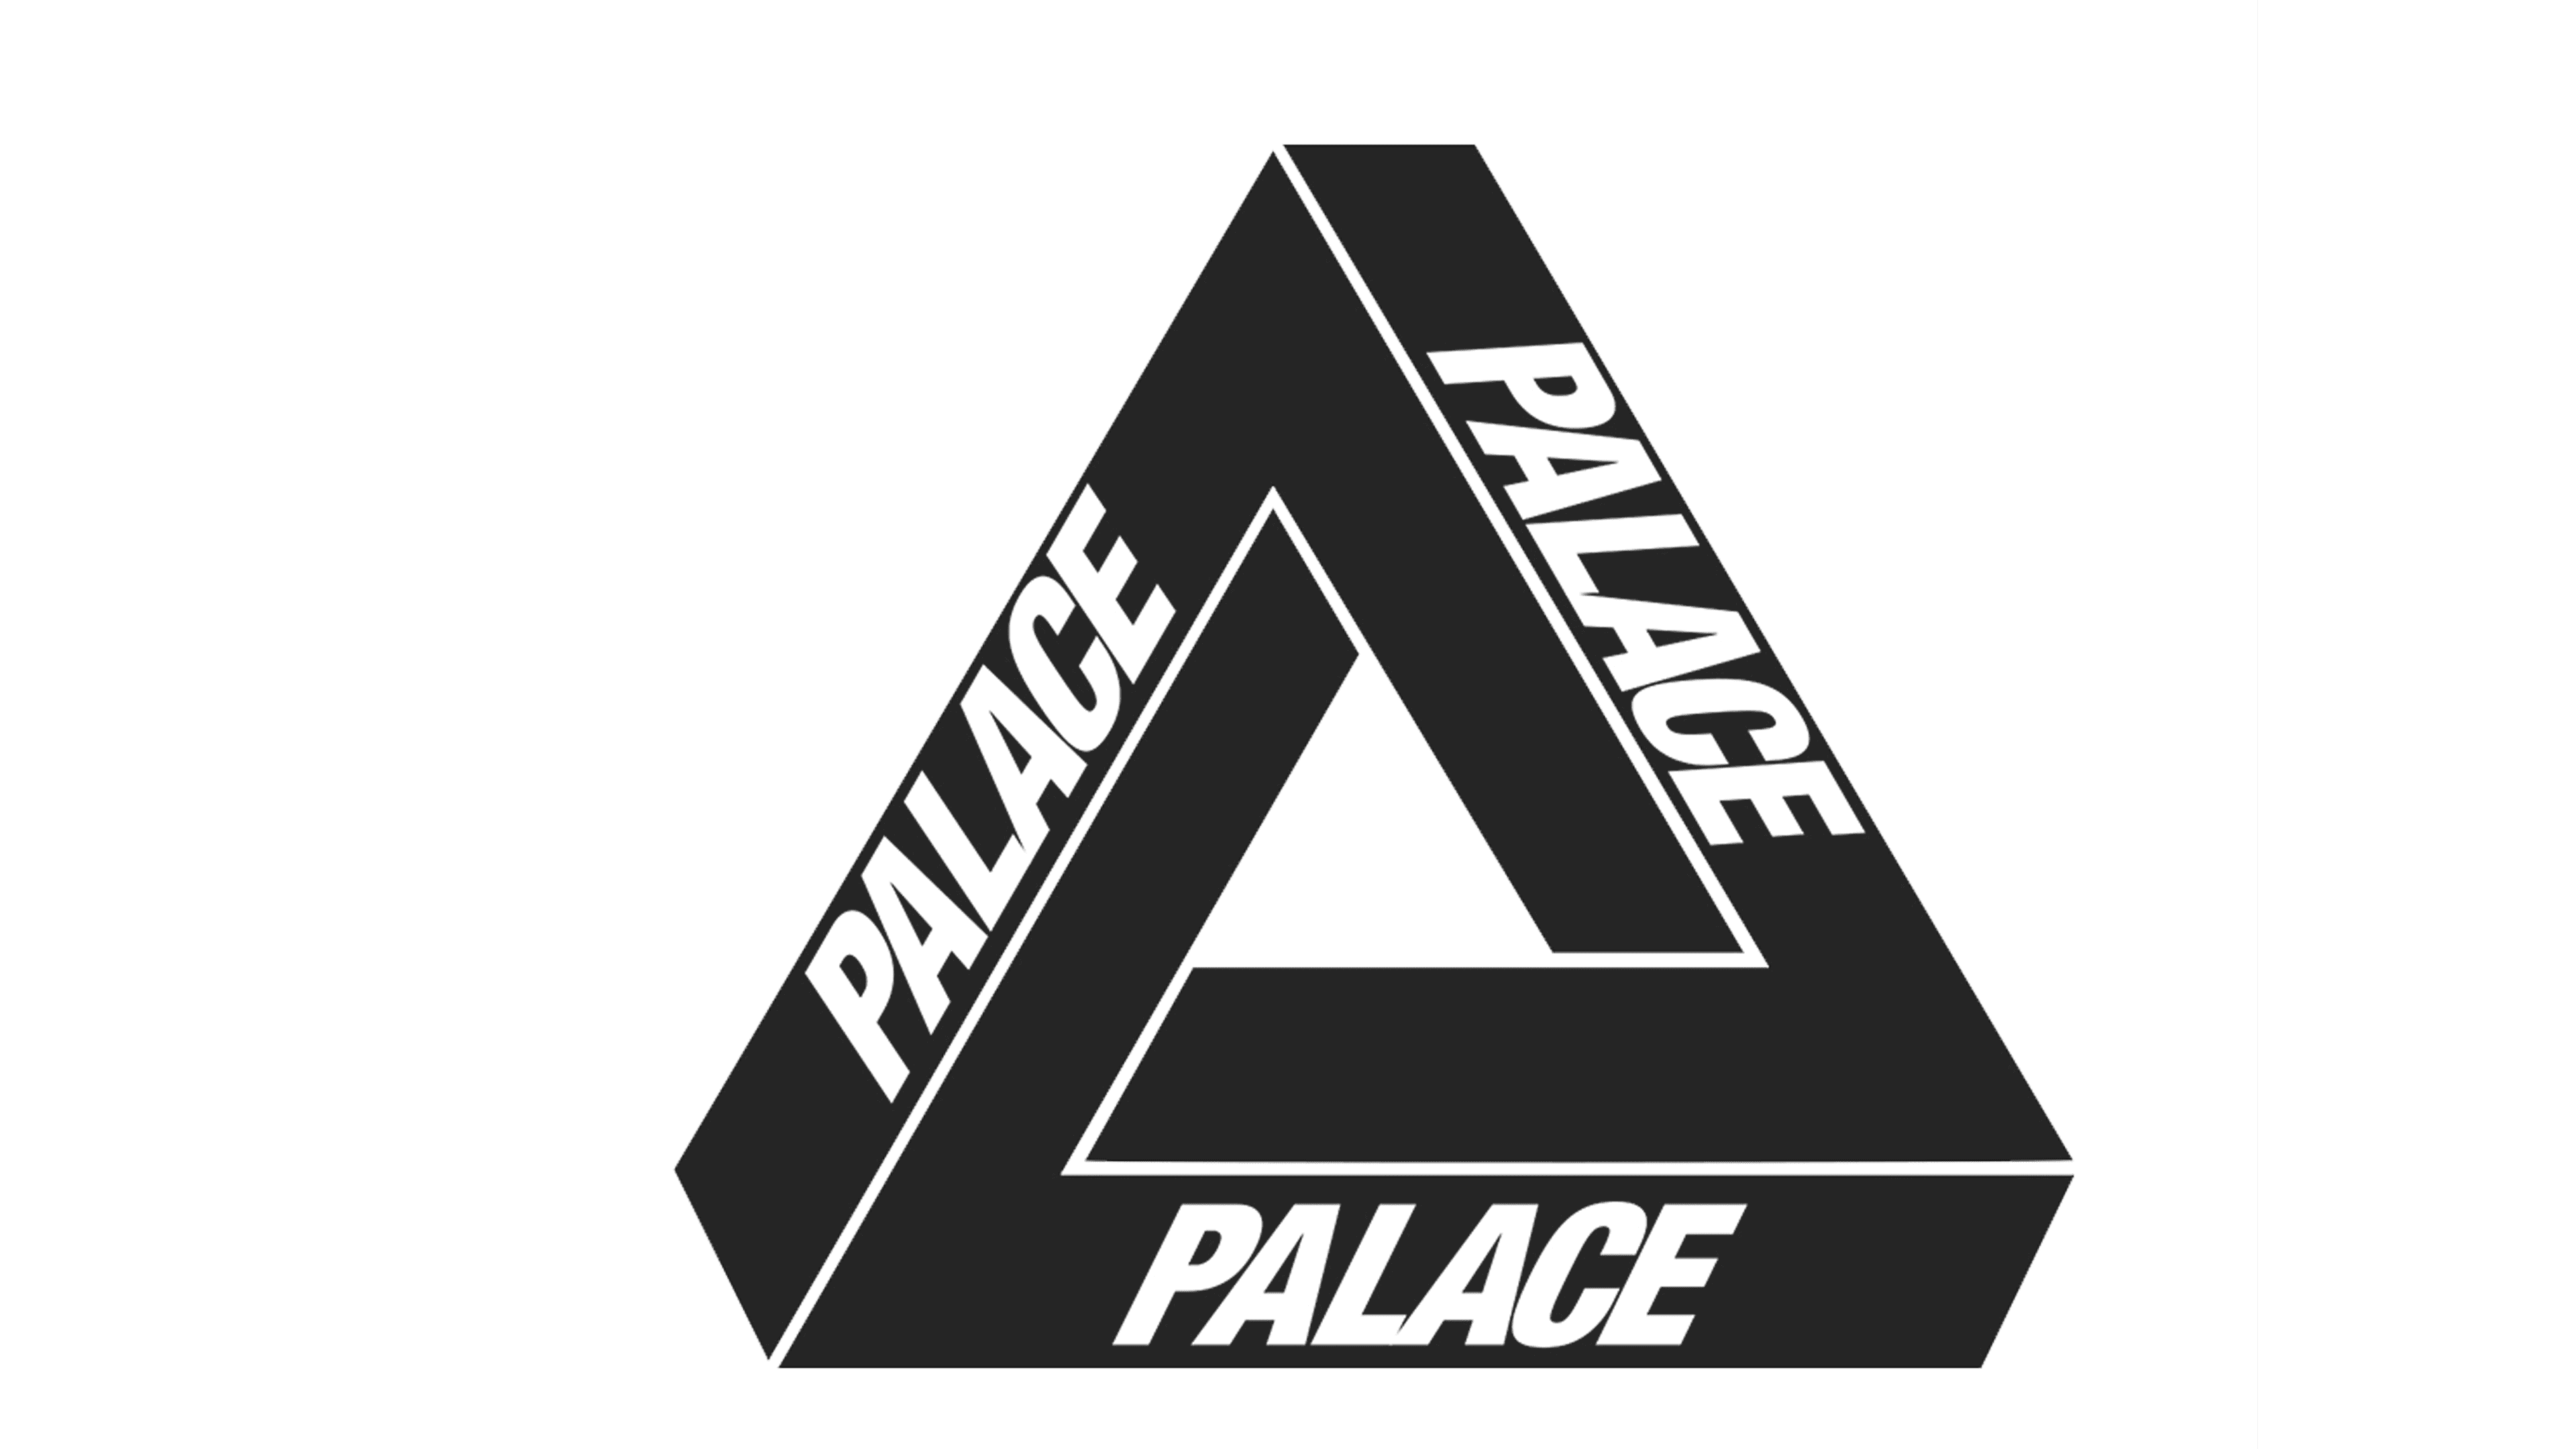 Palace Logo meaning, history, PNG, brand